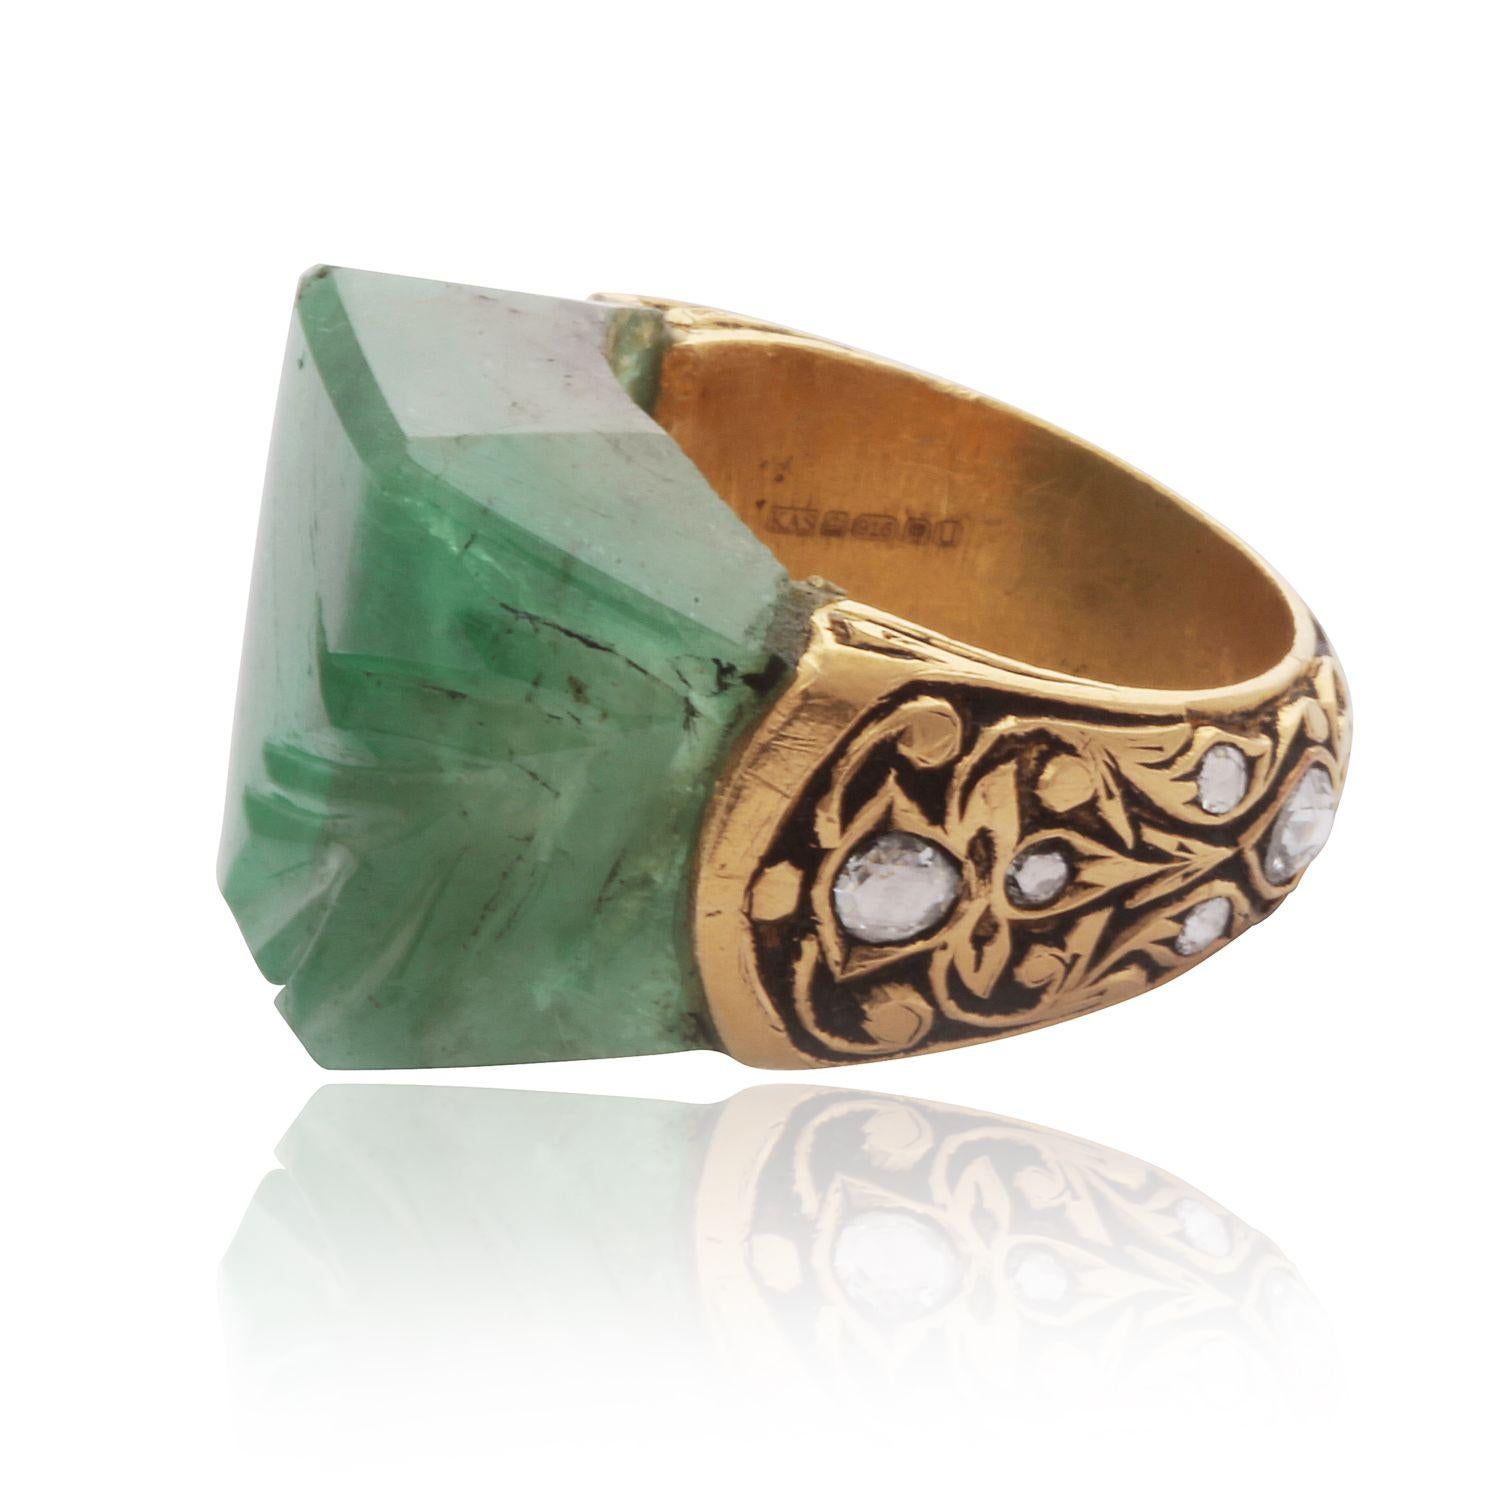 A work of art; an heirloom piece: featuring the 500 year old technique called ‘Partash’ hand inlaid work set on 22kt gold with natural rose cut diamonds and natural carved emerald. A one off piece.

25.34 carat of Emerald; 12.32 grams of 22kt gold ;